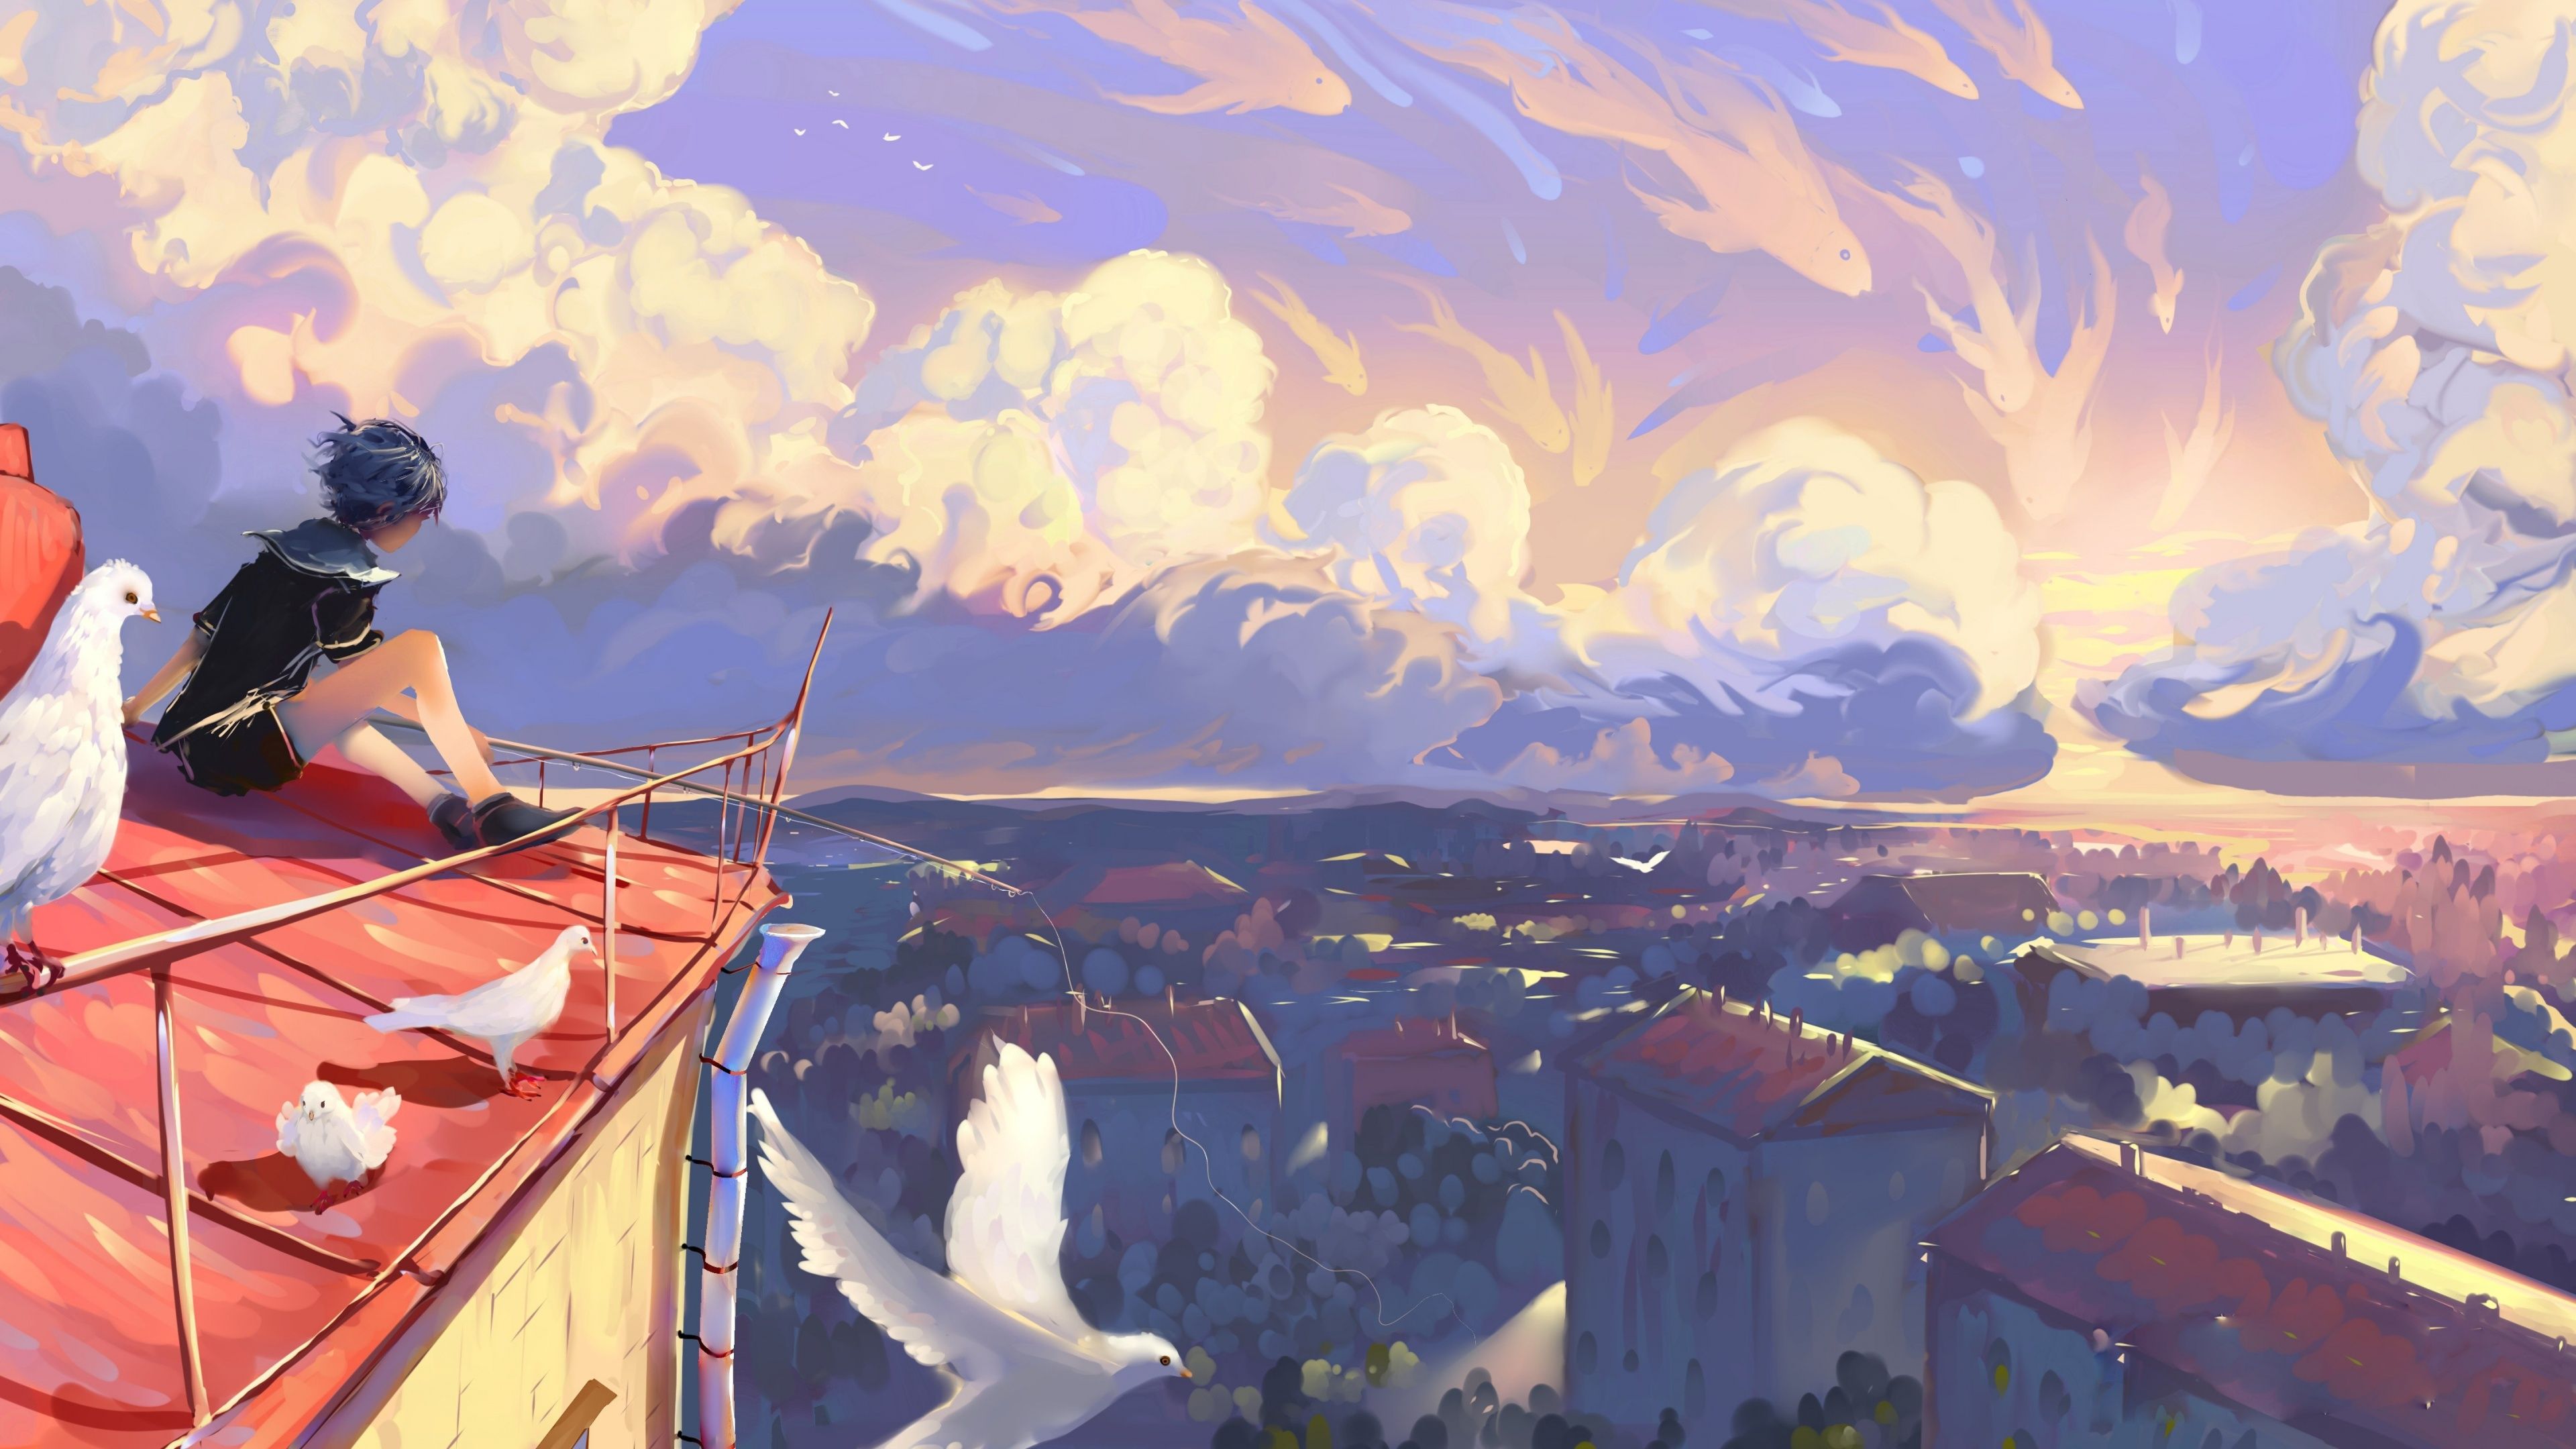 Wallpaper Sky, Cityscape, Buildings, Clouds, Painting, Birds, Anime Girl, Anime Scenery